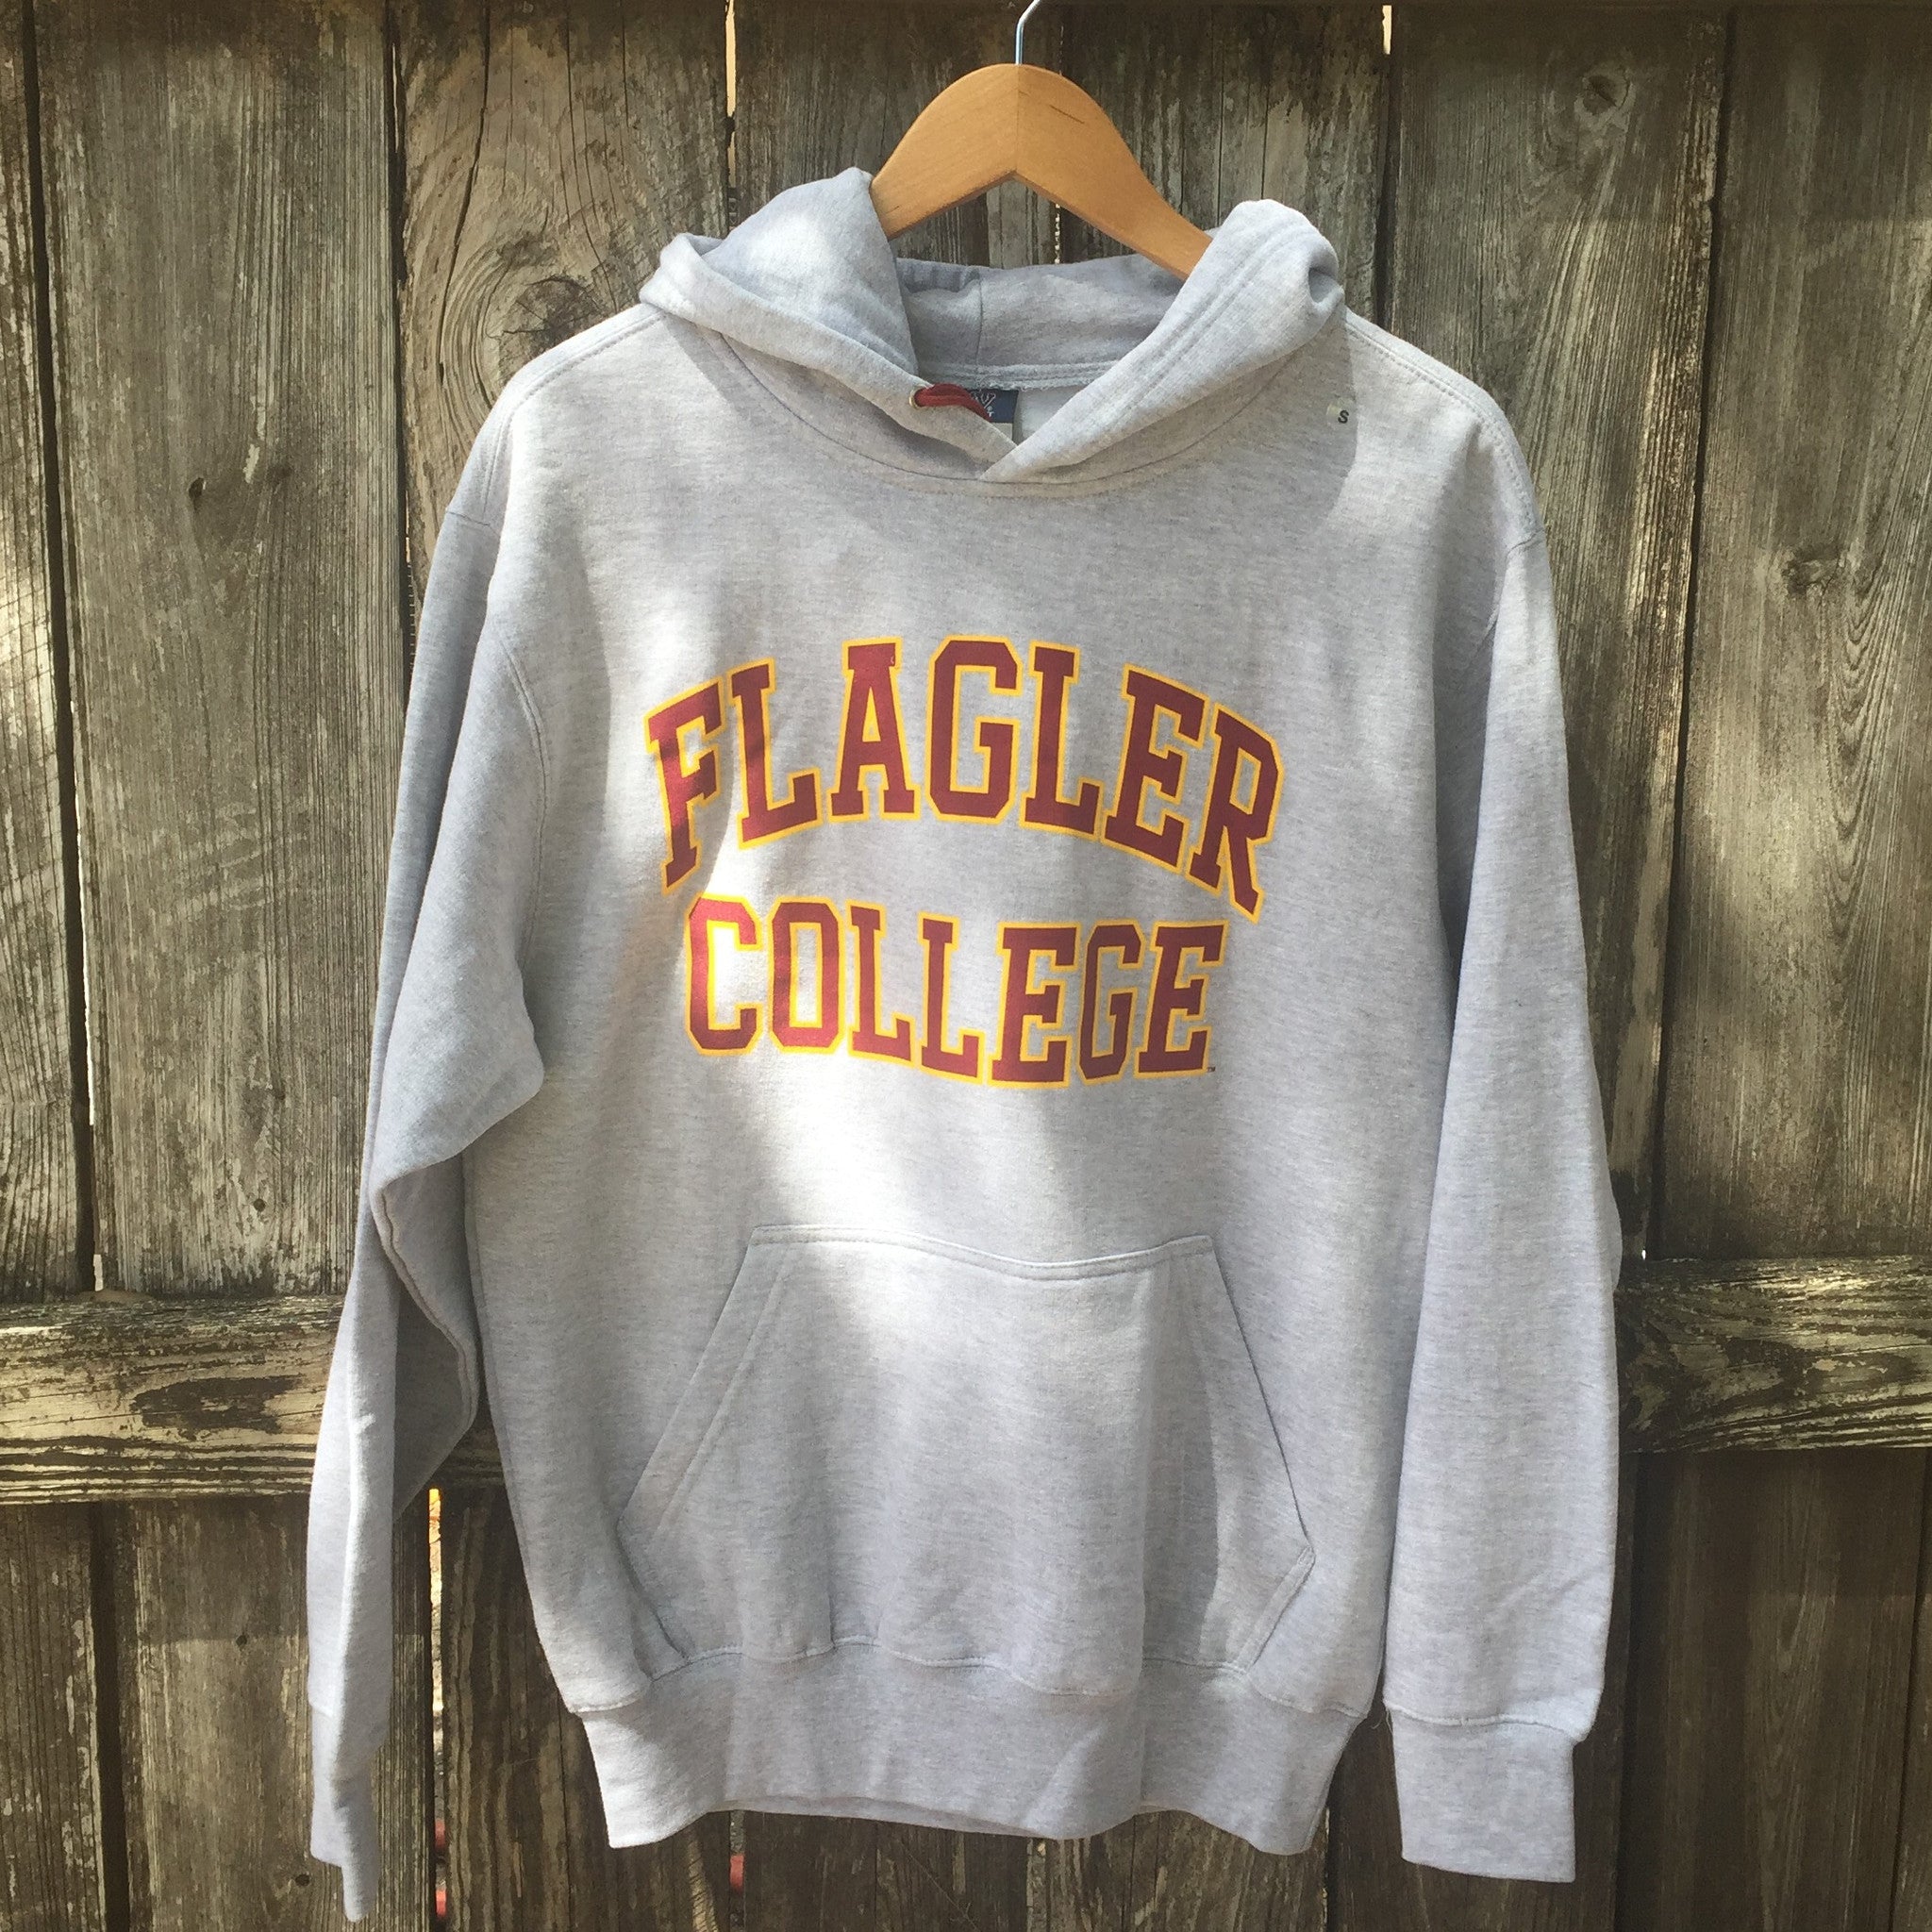 Grey hooded sweatshirt with crimson with yellow boarder imprint saying Flagler over College